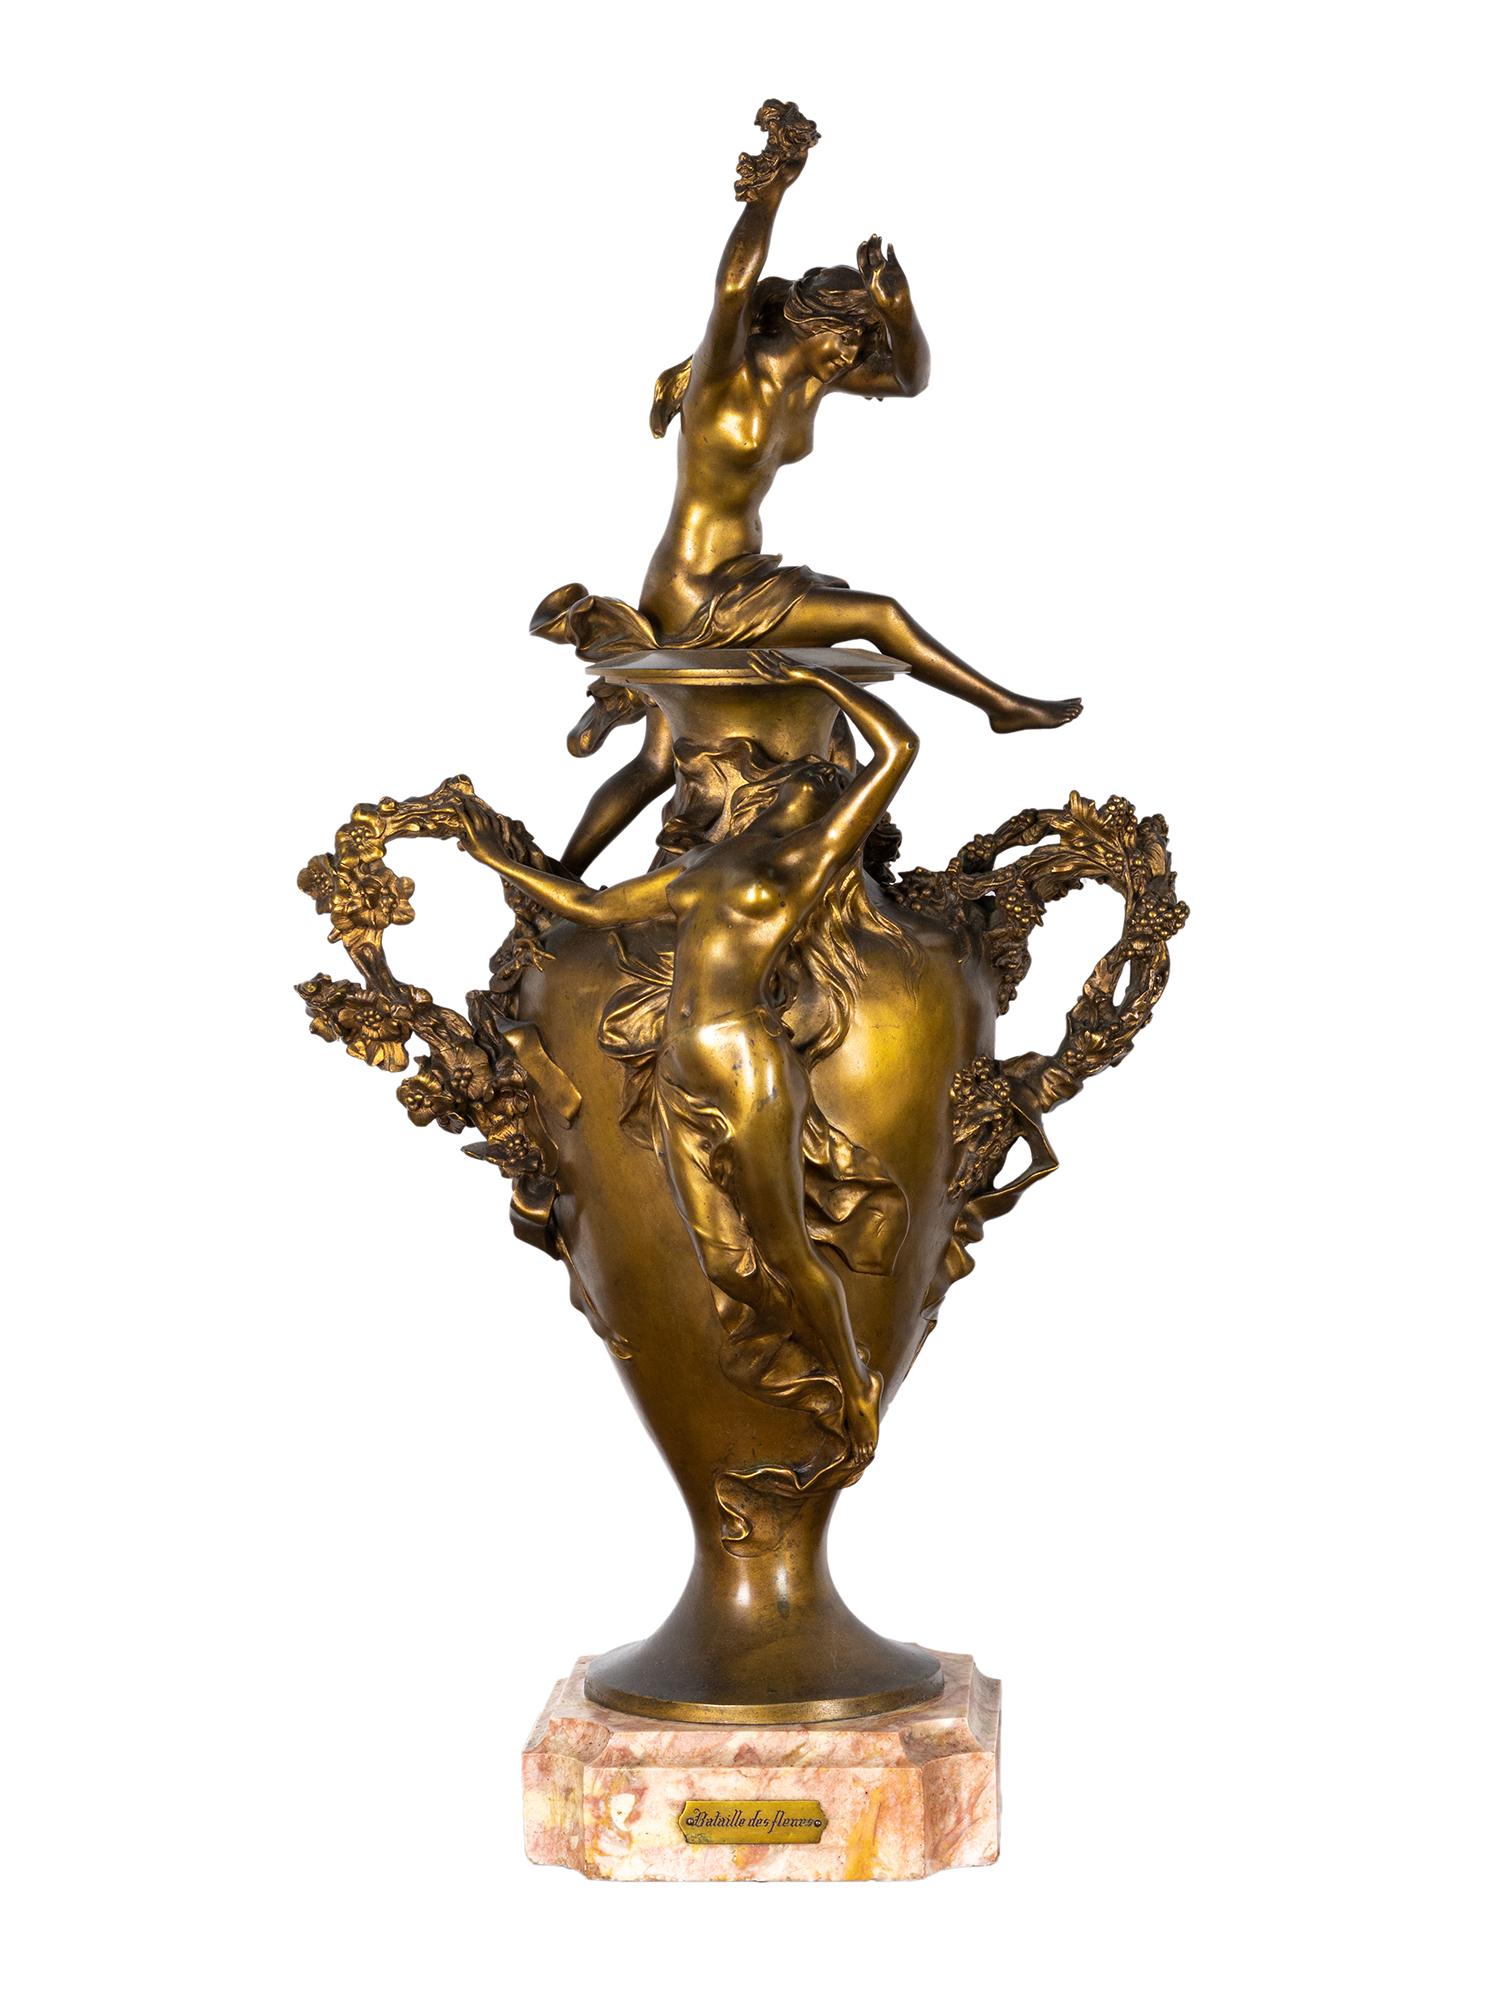 Félix Charpentier's masterpiece, 'Bataille des fleurs,' is a stunning golden bronze statue with a beautiful gilded patina finish. It draws inspiration from the colorful Carnival festivities of Côte d'Azur and portrays two nude nymphs and putto who